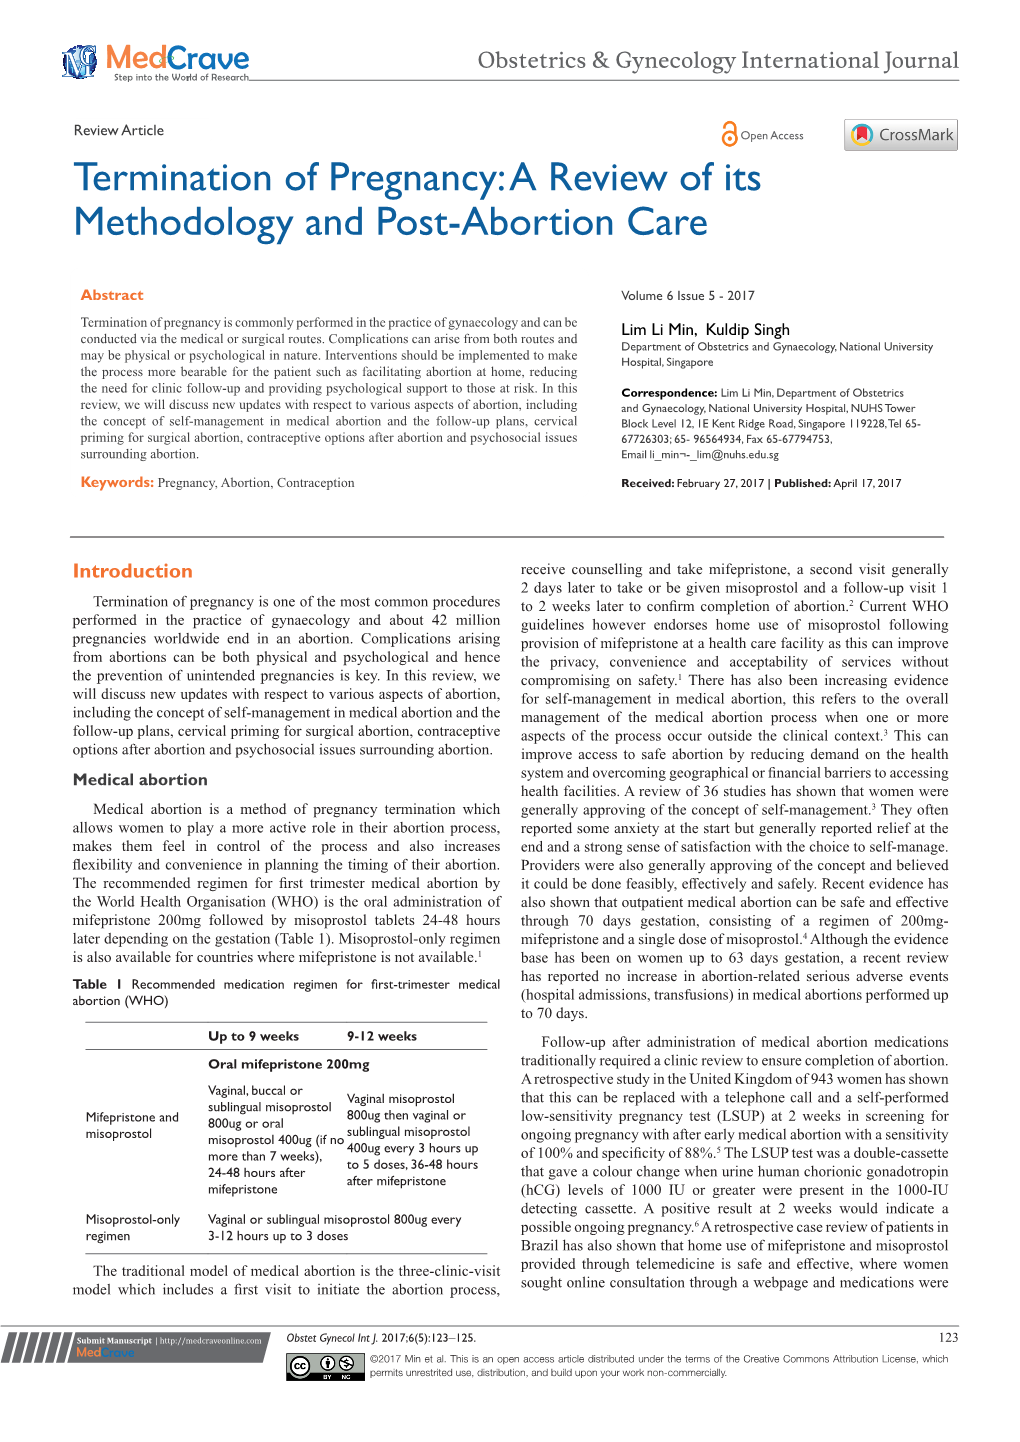 Termination of Pregnancy: a Review of Its Methodology and Post-Abortion Care